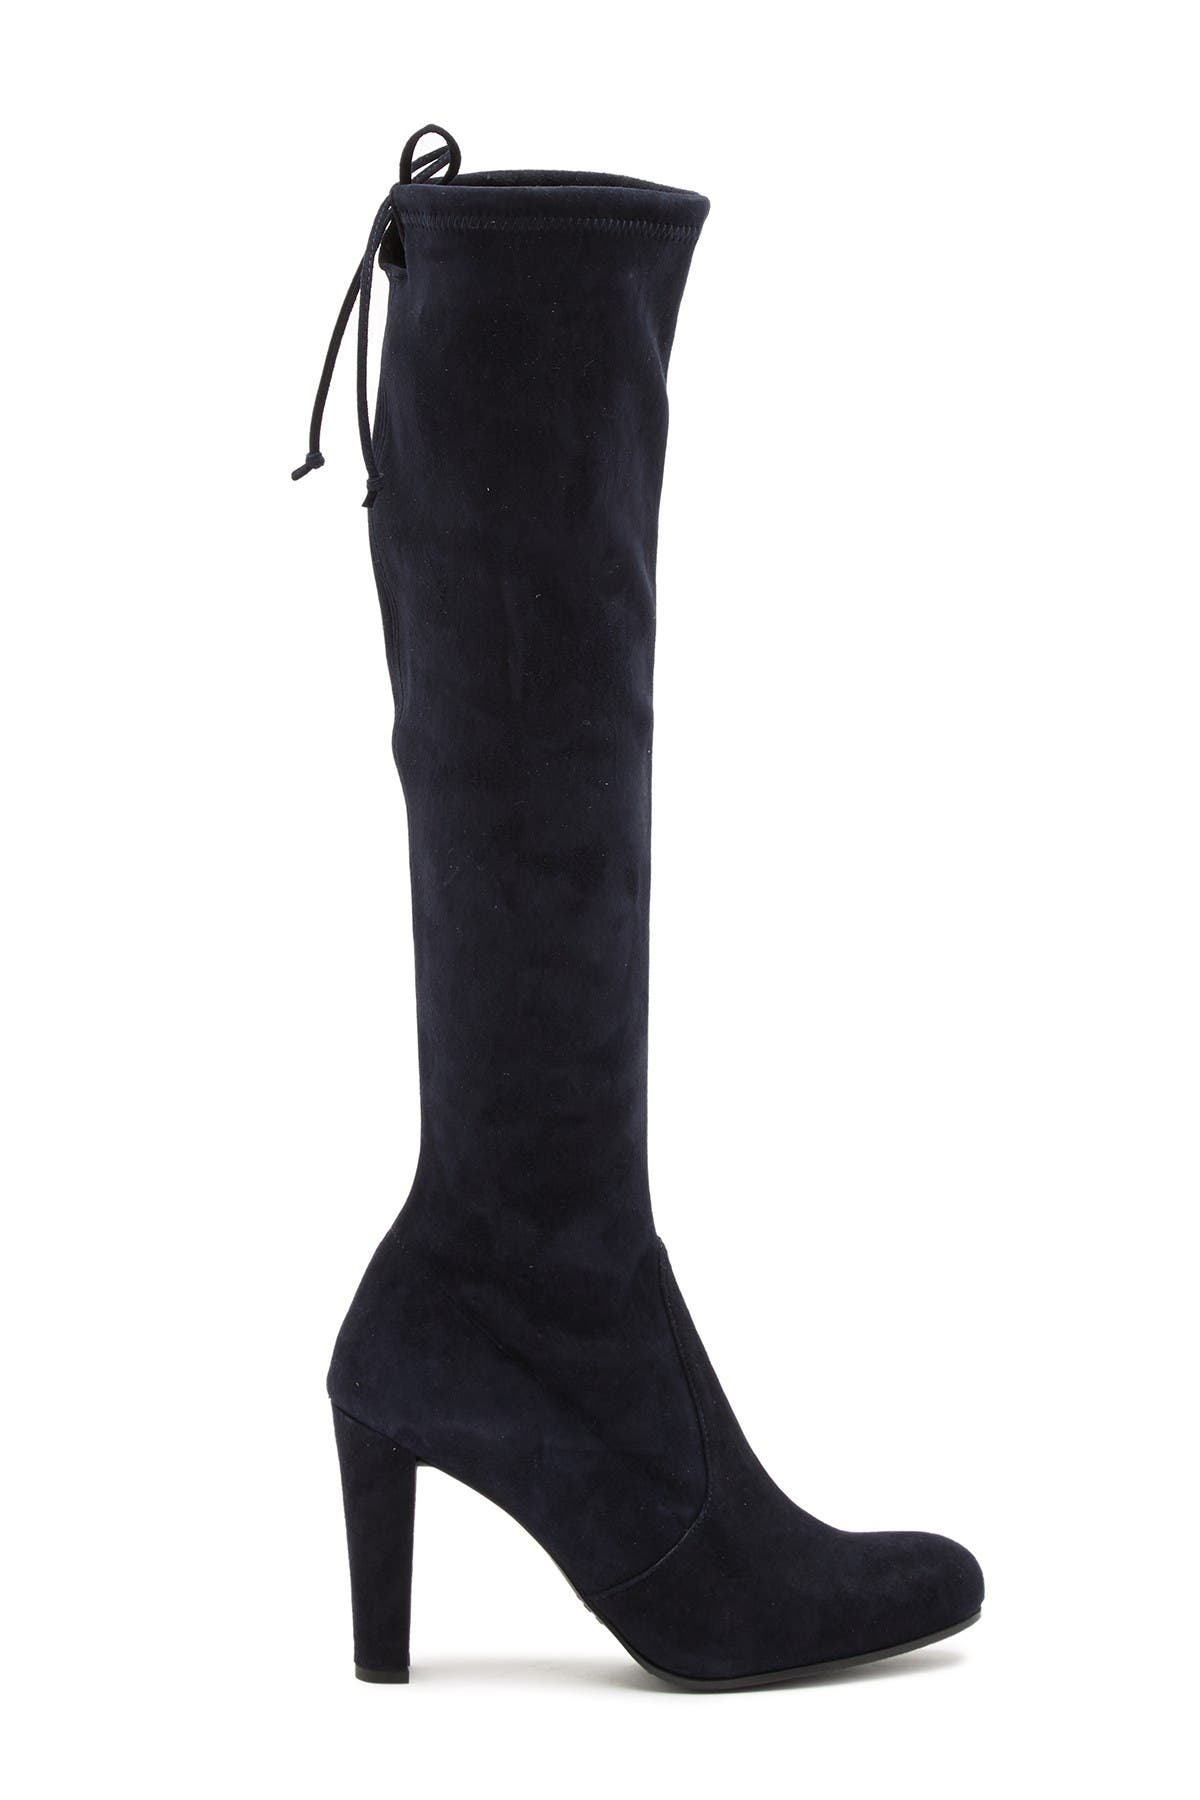 keenland knee high stretch suede boot